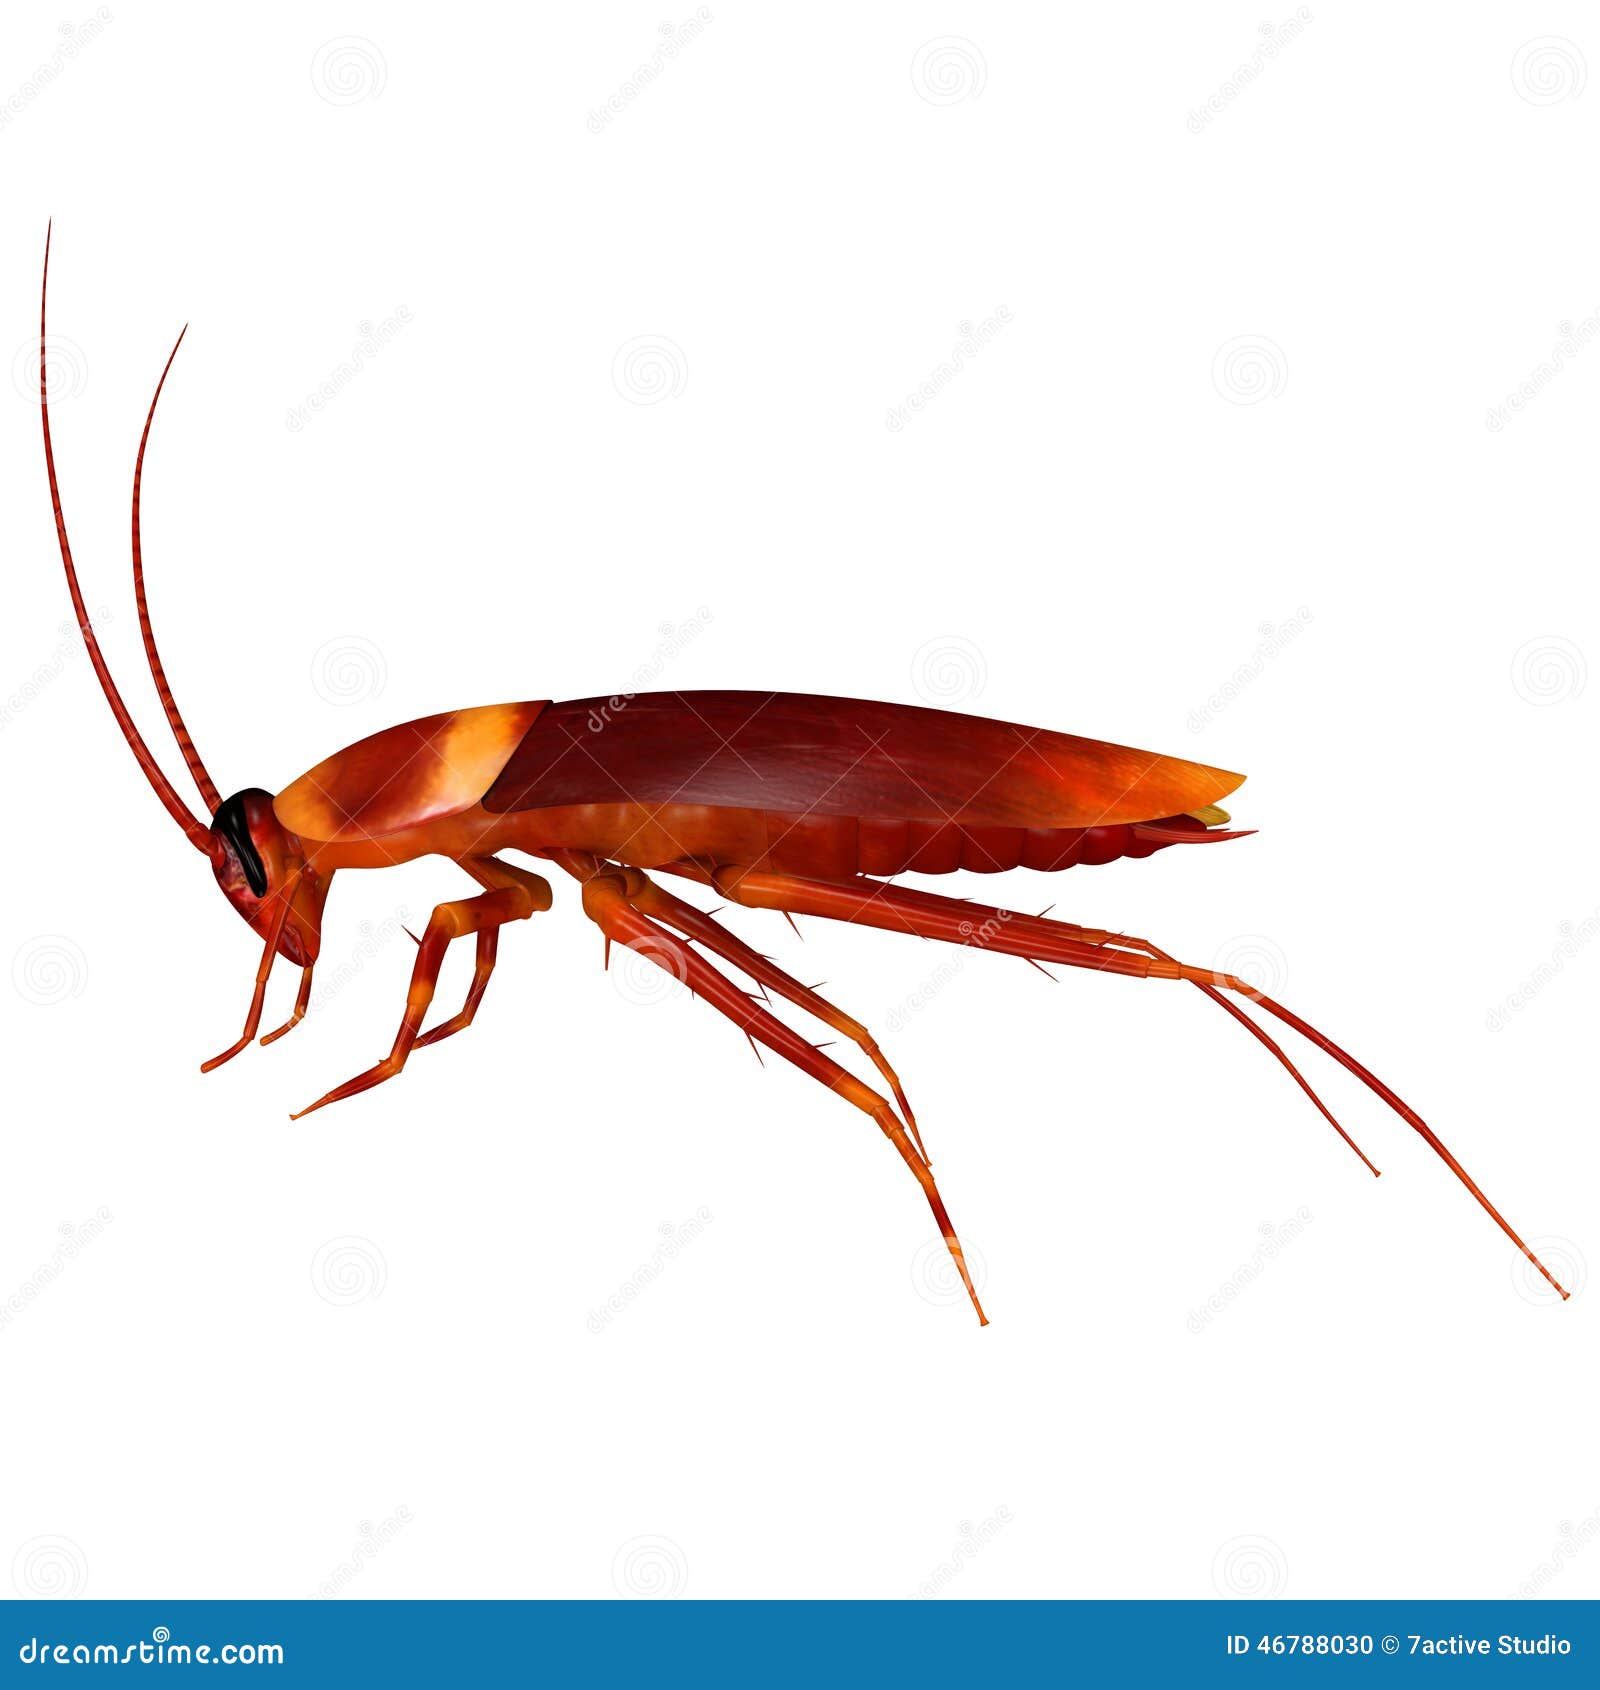 Cockroach stock photo. Image of control, body, american - 46788030